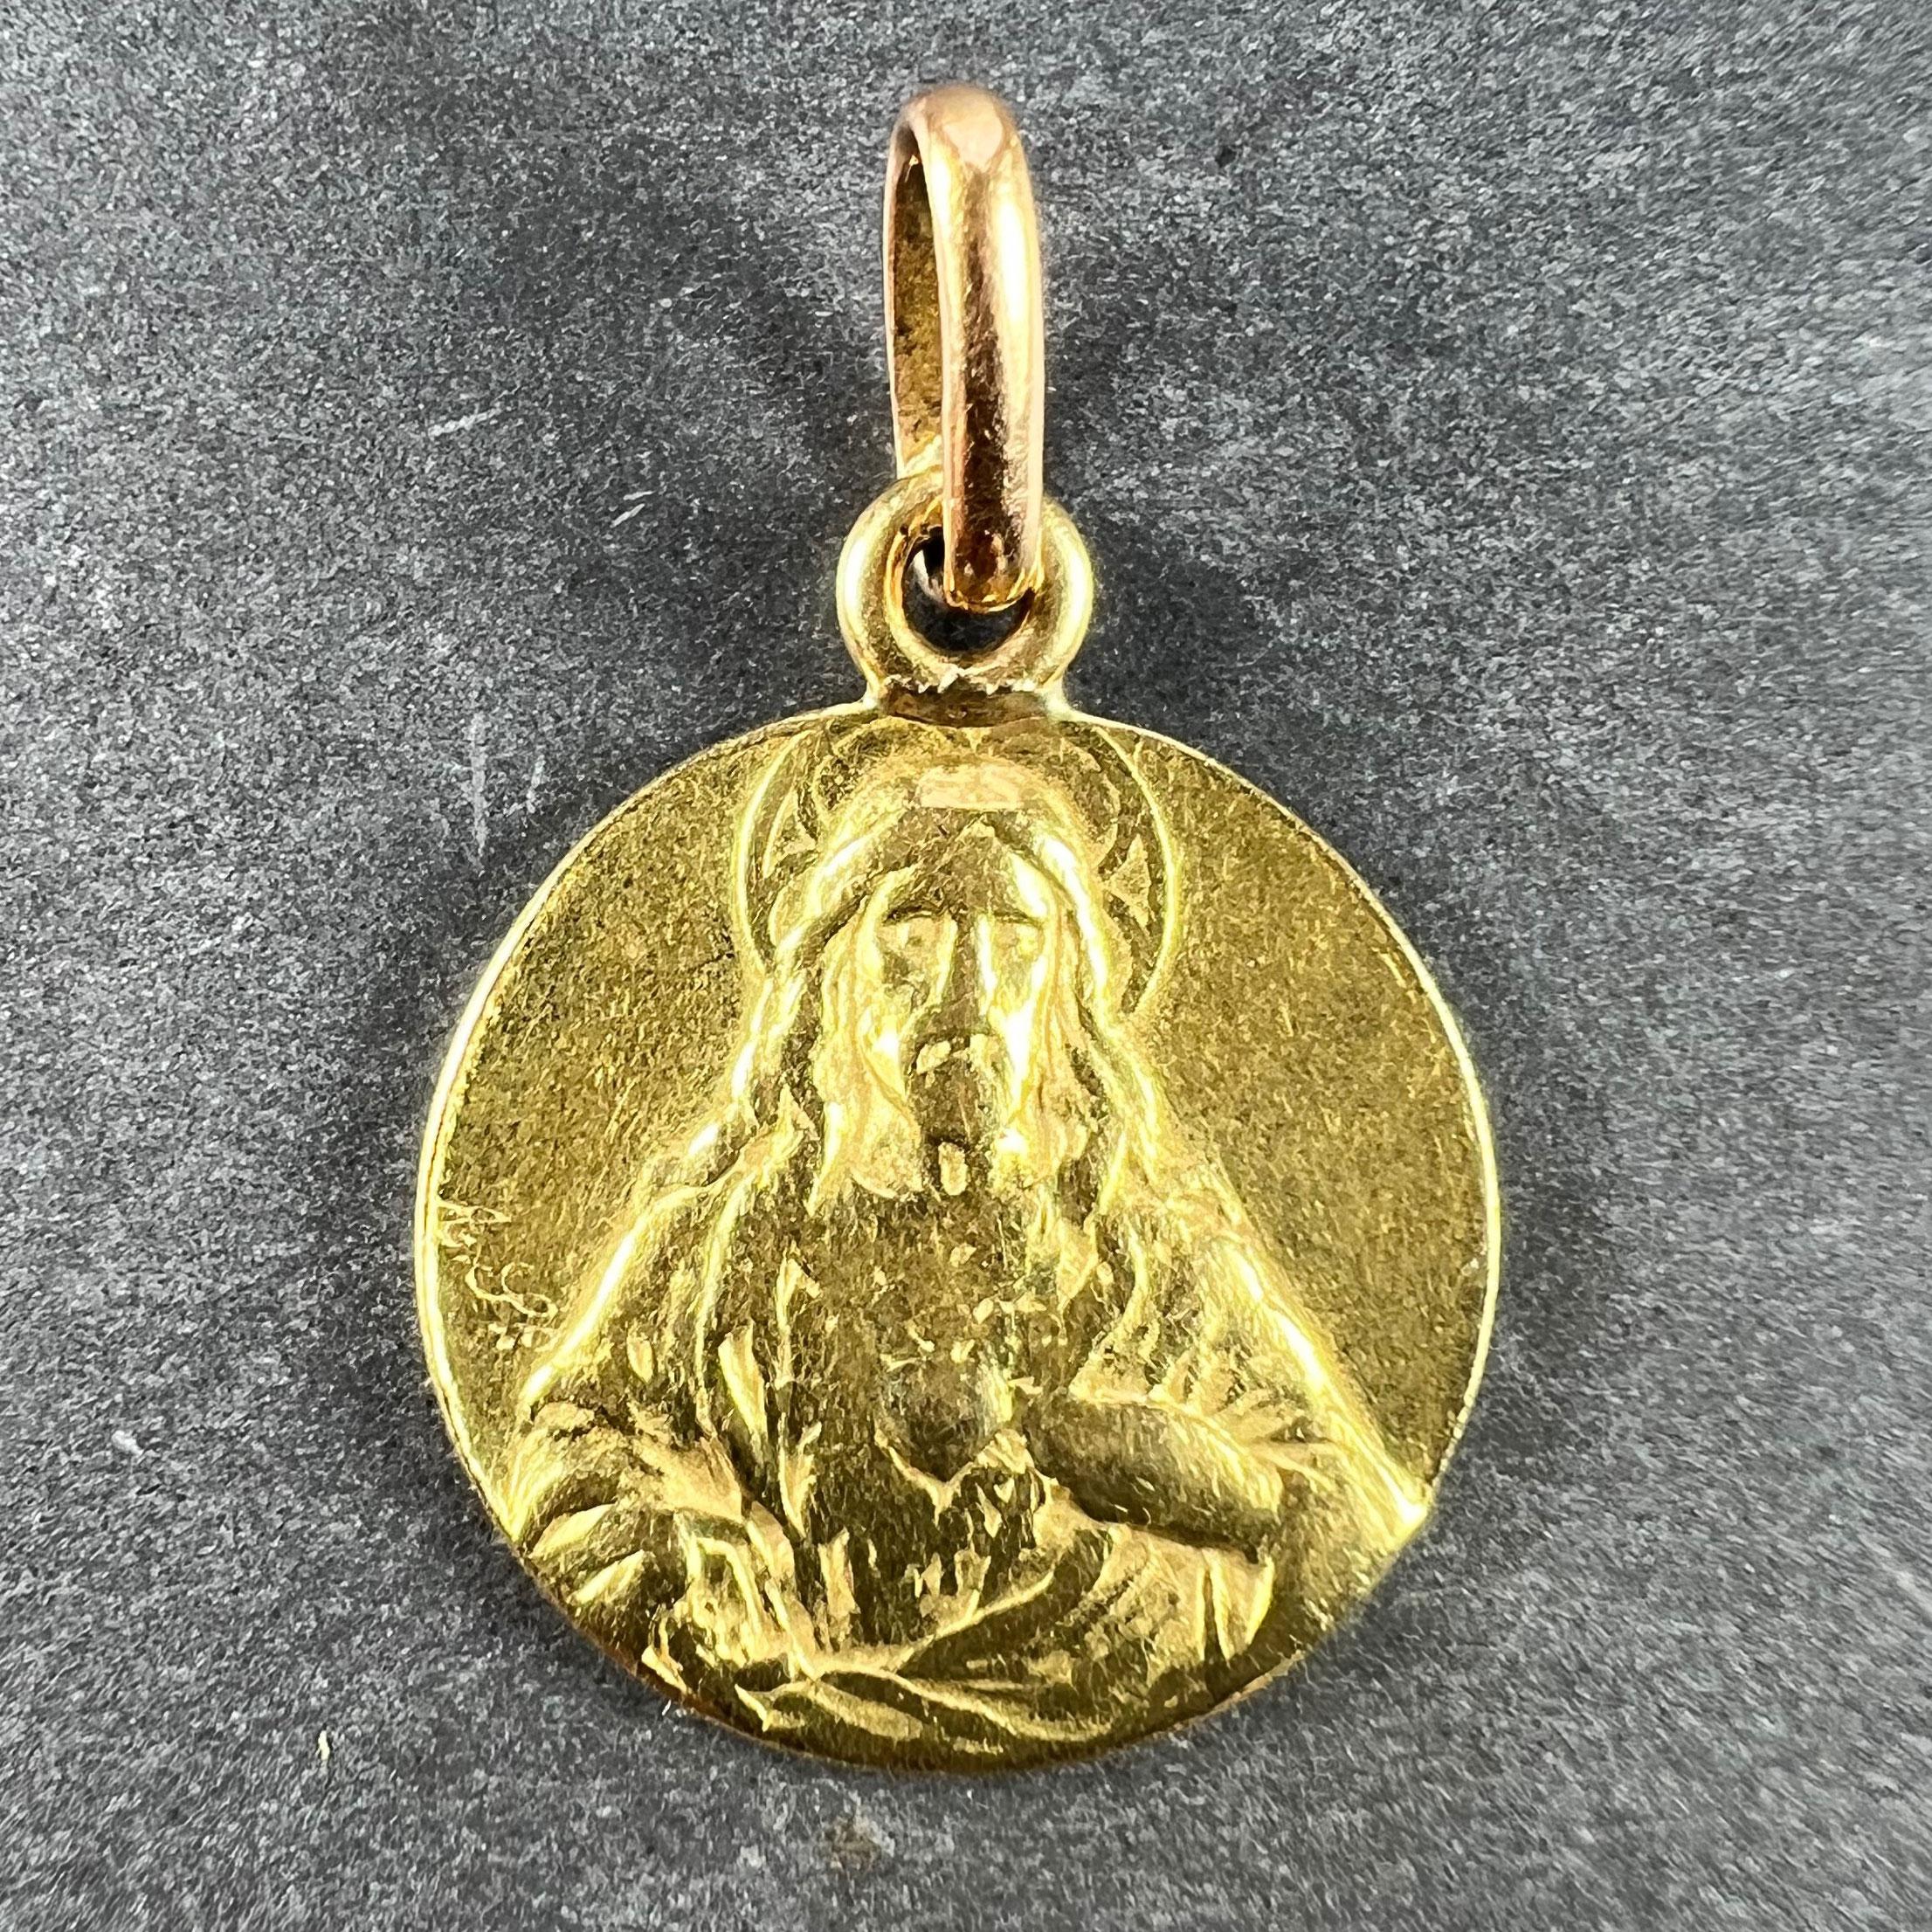 A French 18 karat (18K) yellow gold charm pendant designed as a round medal with a relief of Jesus Christ with the Sacred Heart to one side; to the other, the Virgin Mary as Madonna and Child on a throne in Heaven. Unmarked but tested for 18 karat